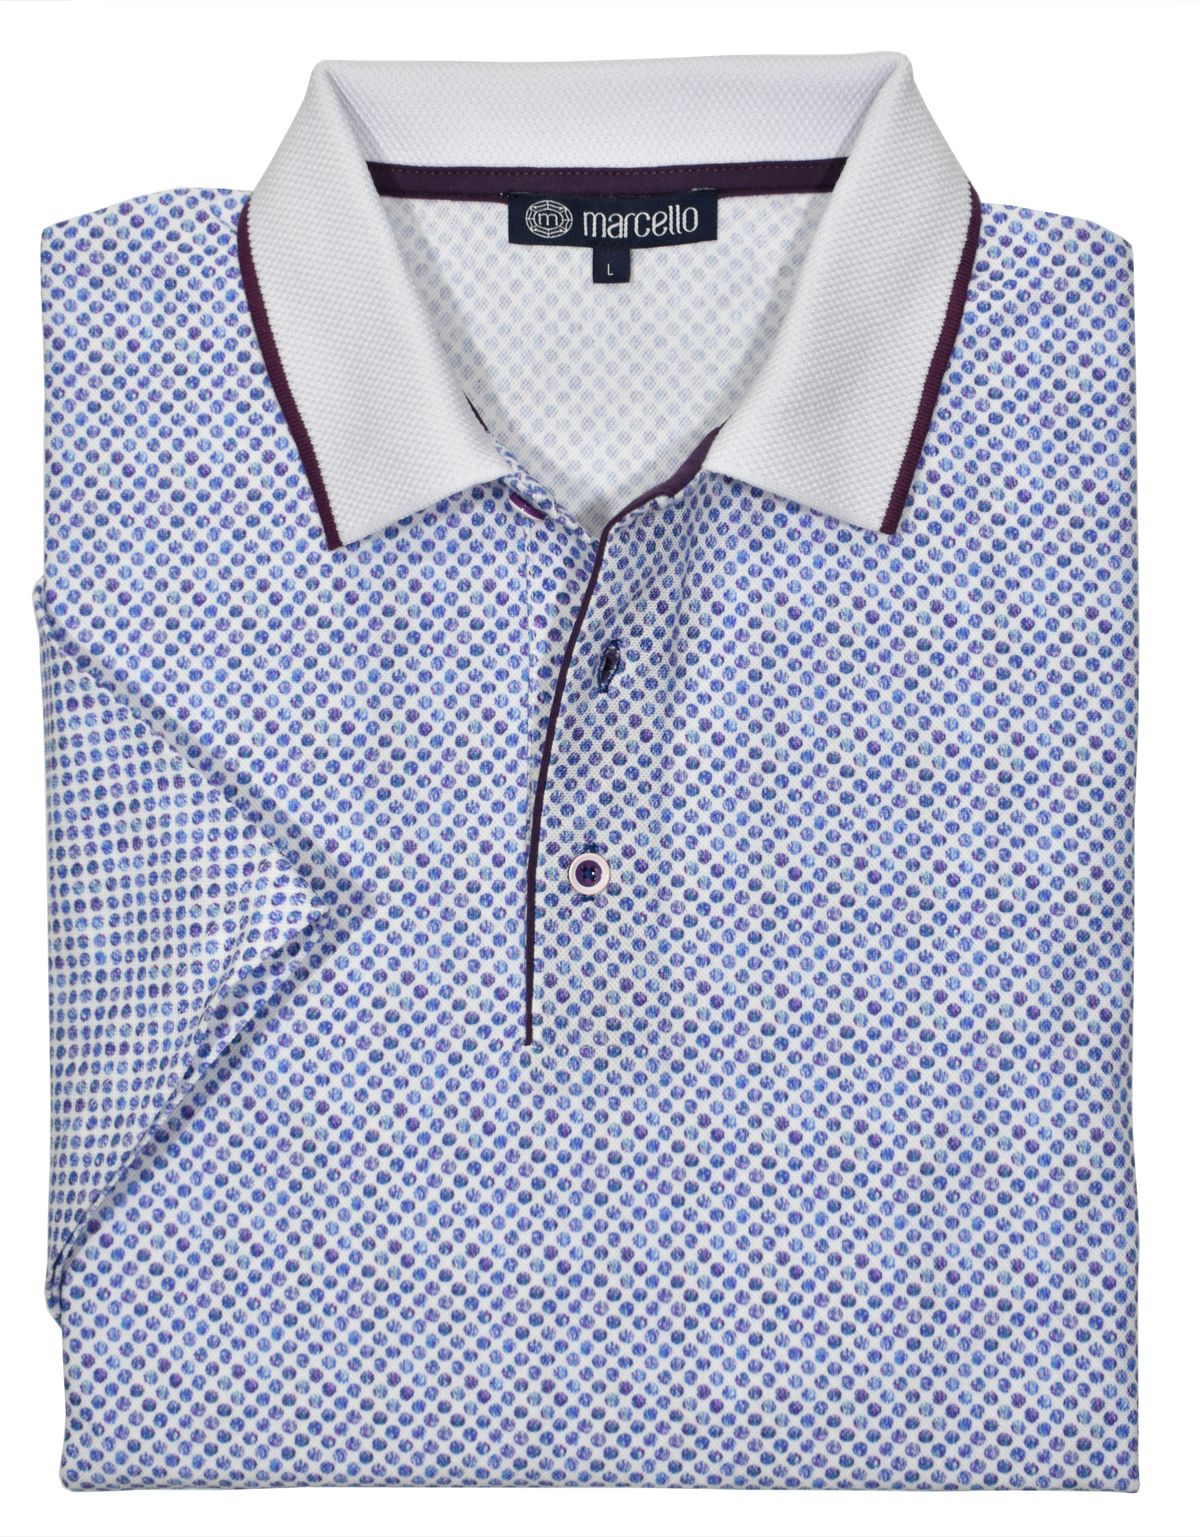 This ultra soft cotton pique polo looks timeless and feels lightweight. Its soft circular shaded plum neat pattern, contrast trim fabric, open sleeves and custom buttons make it unique and stylish. Enjoy its classic fit and timeless look.